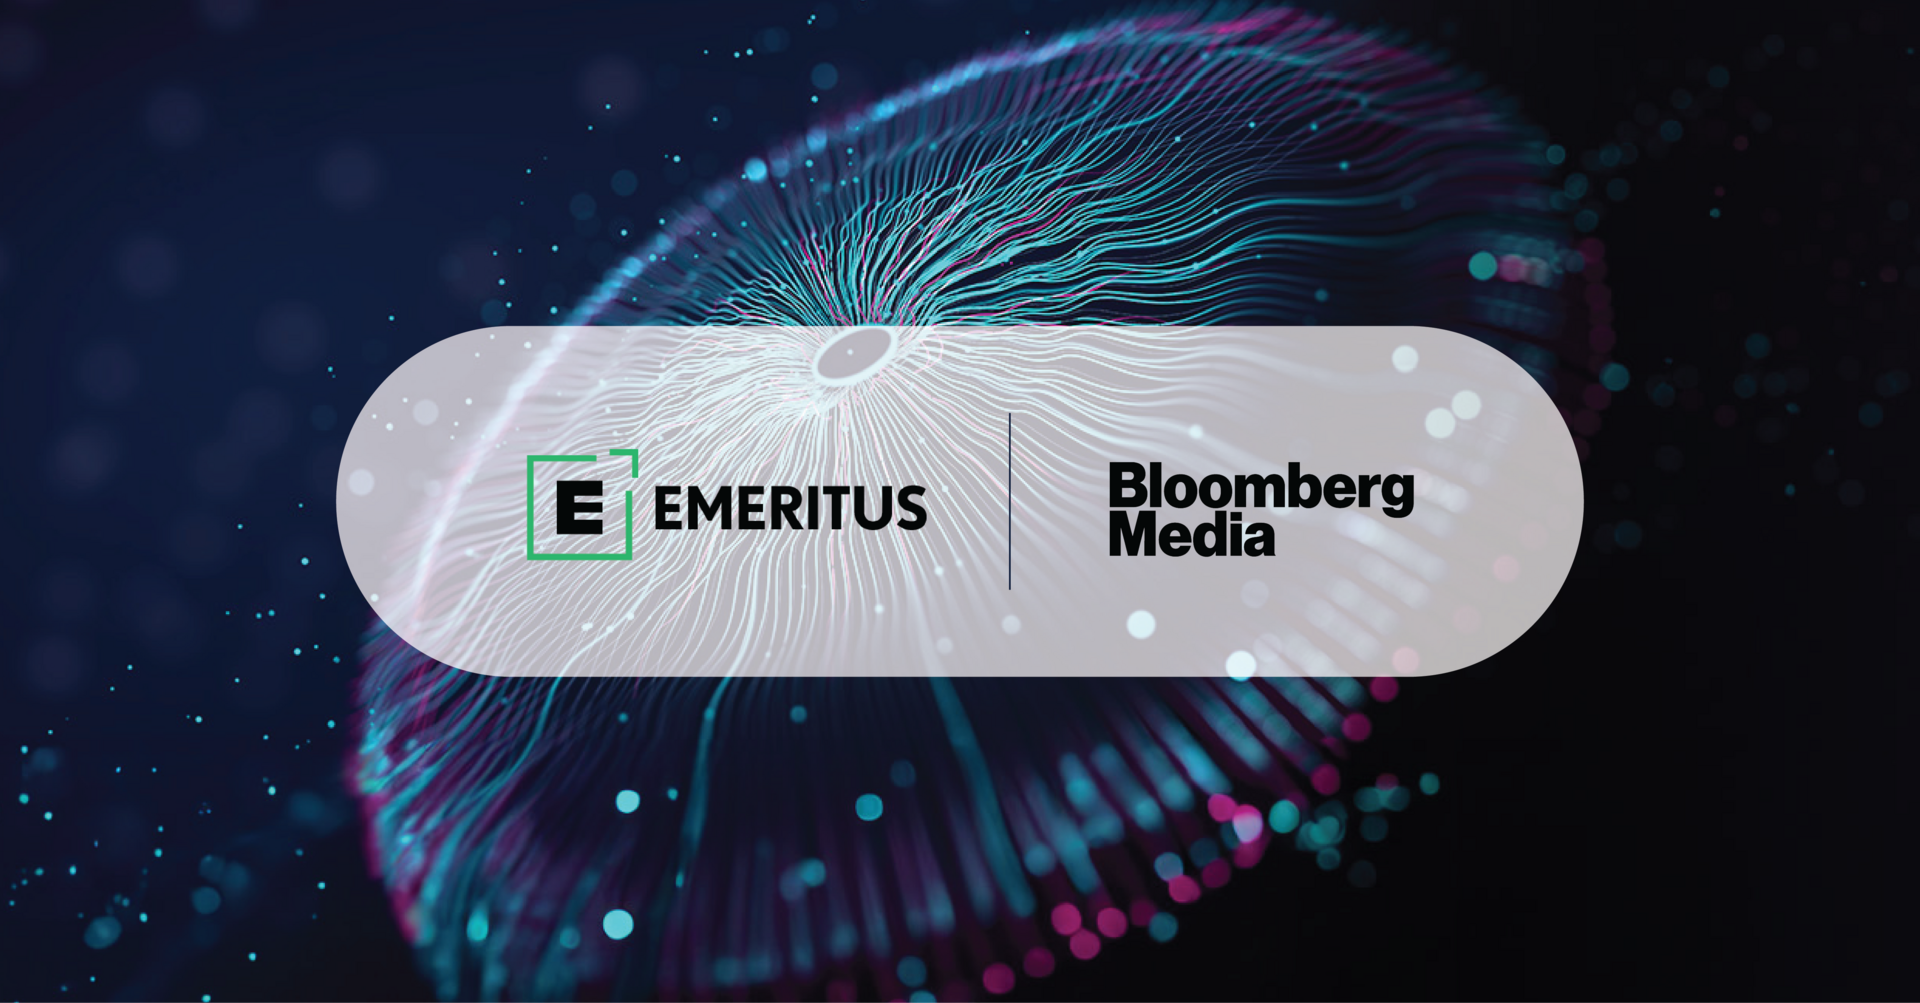 Bloomberg Media and Emeritus Partner to Launch  “Bloomberg Learning”